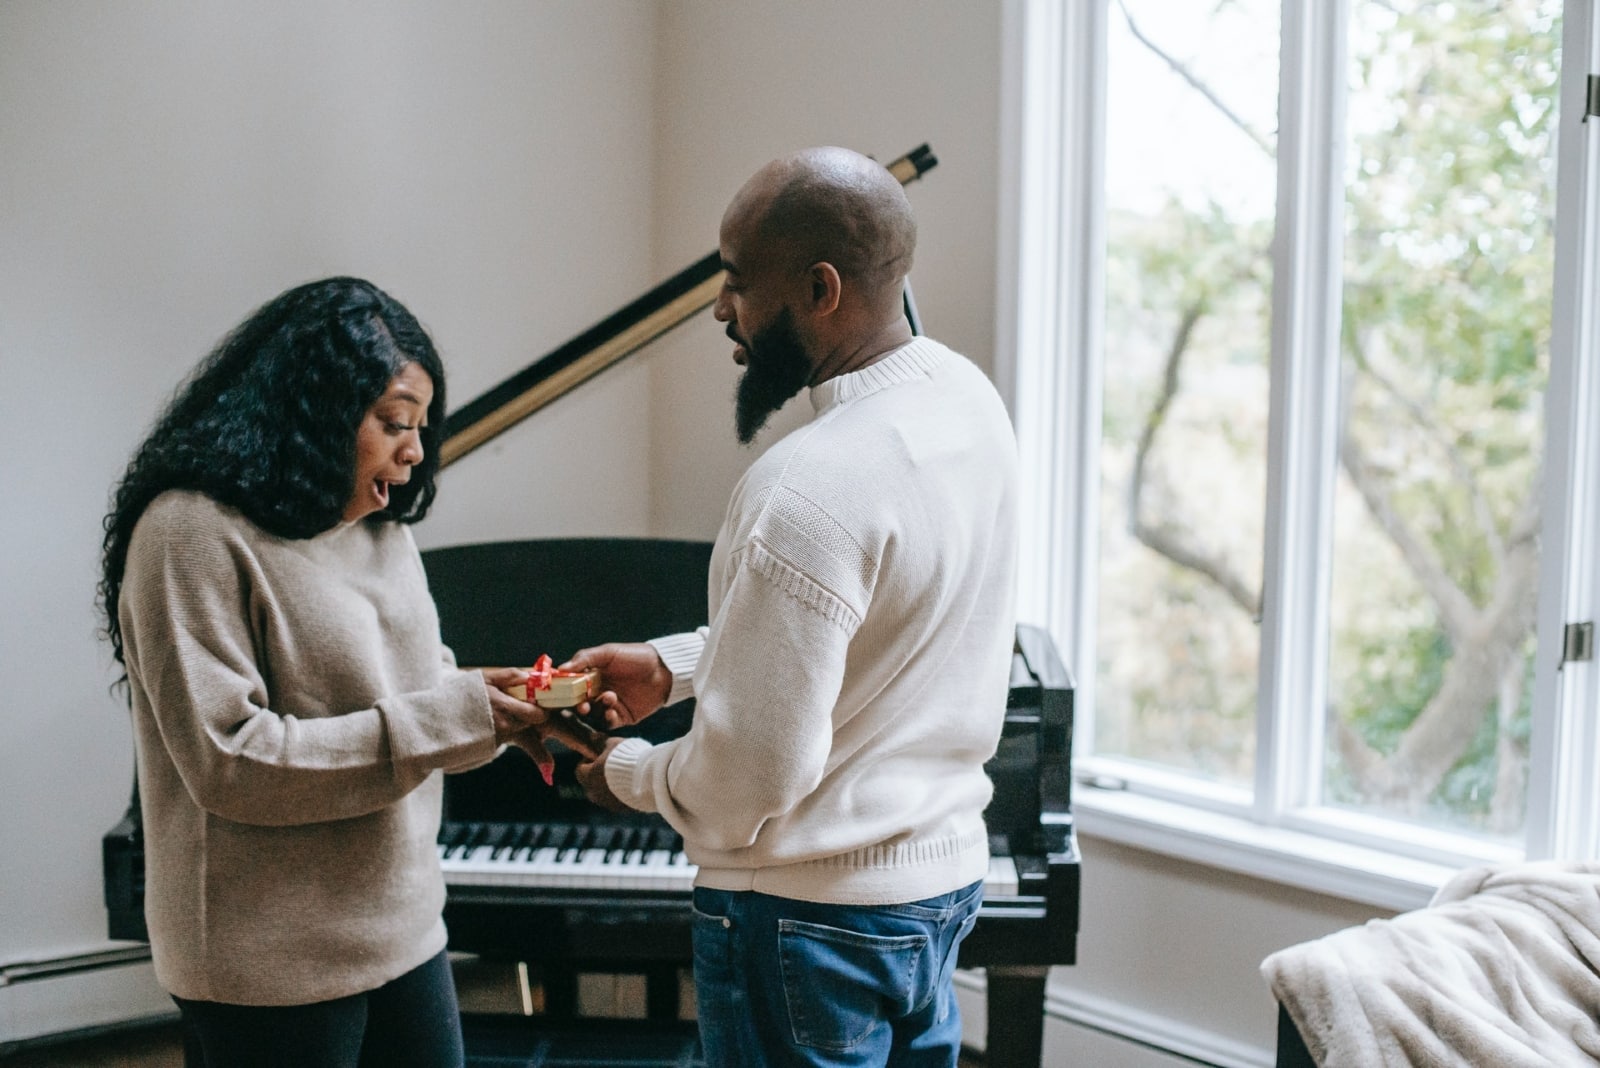 man giving gift to woman while standing near piano